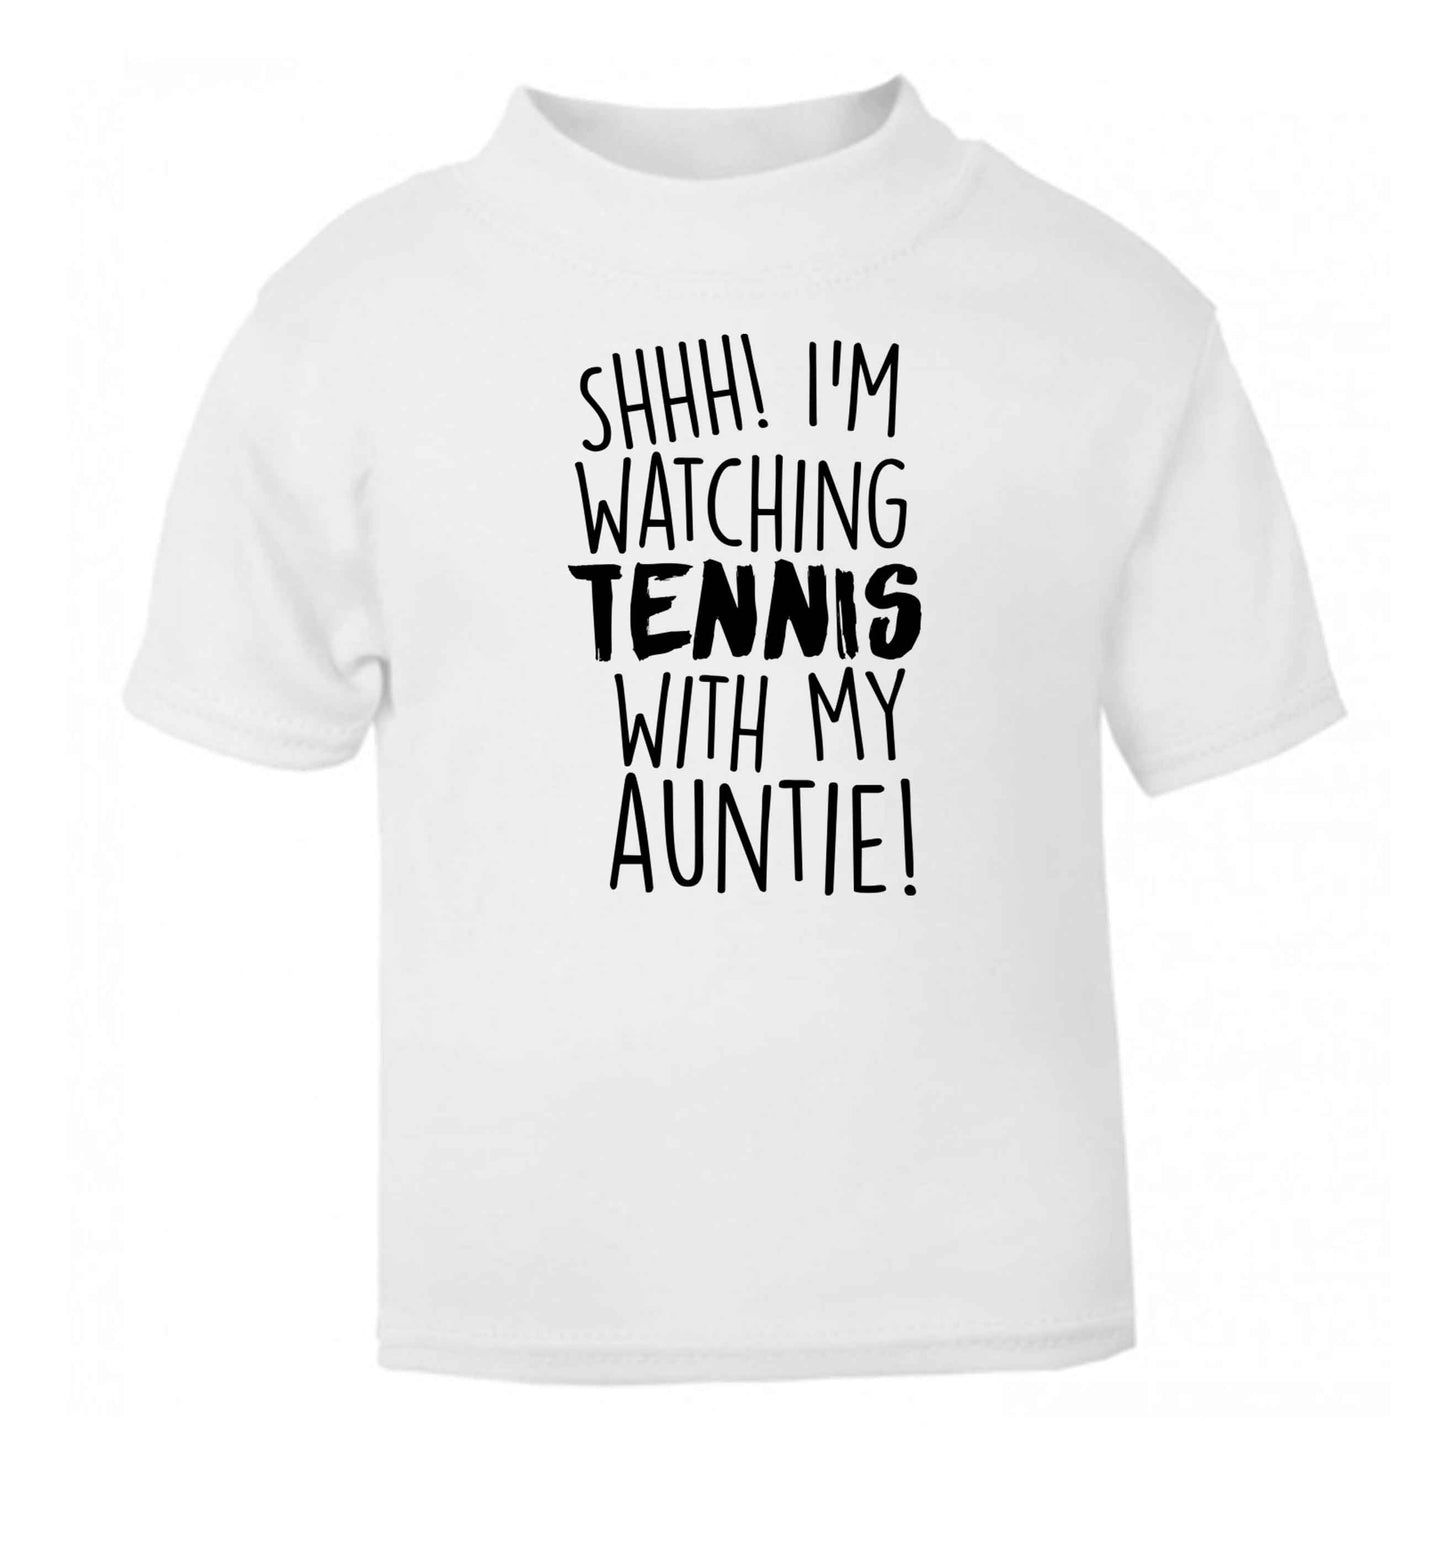 Shh! I'm watching tennis with my auntie! white Baby Toddler Tshirt 2 Years